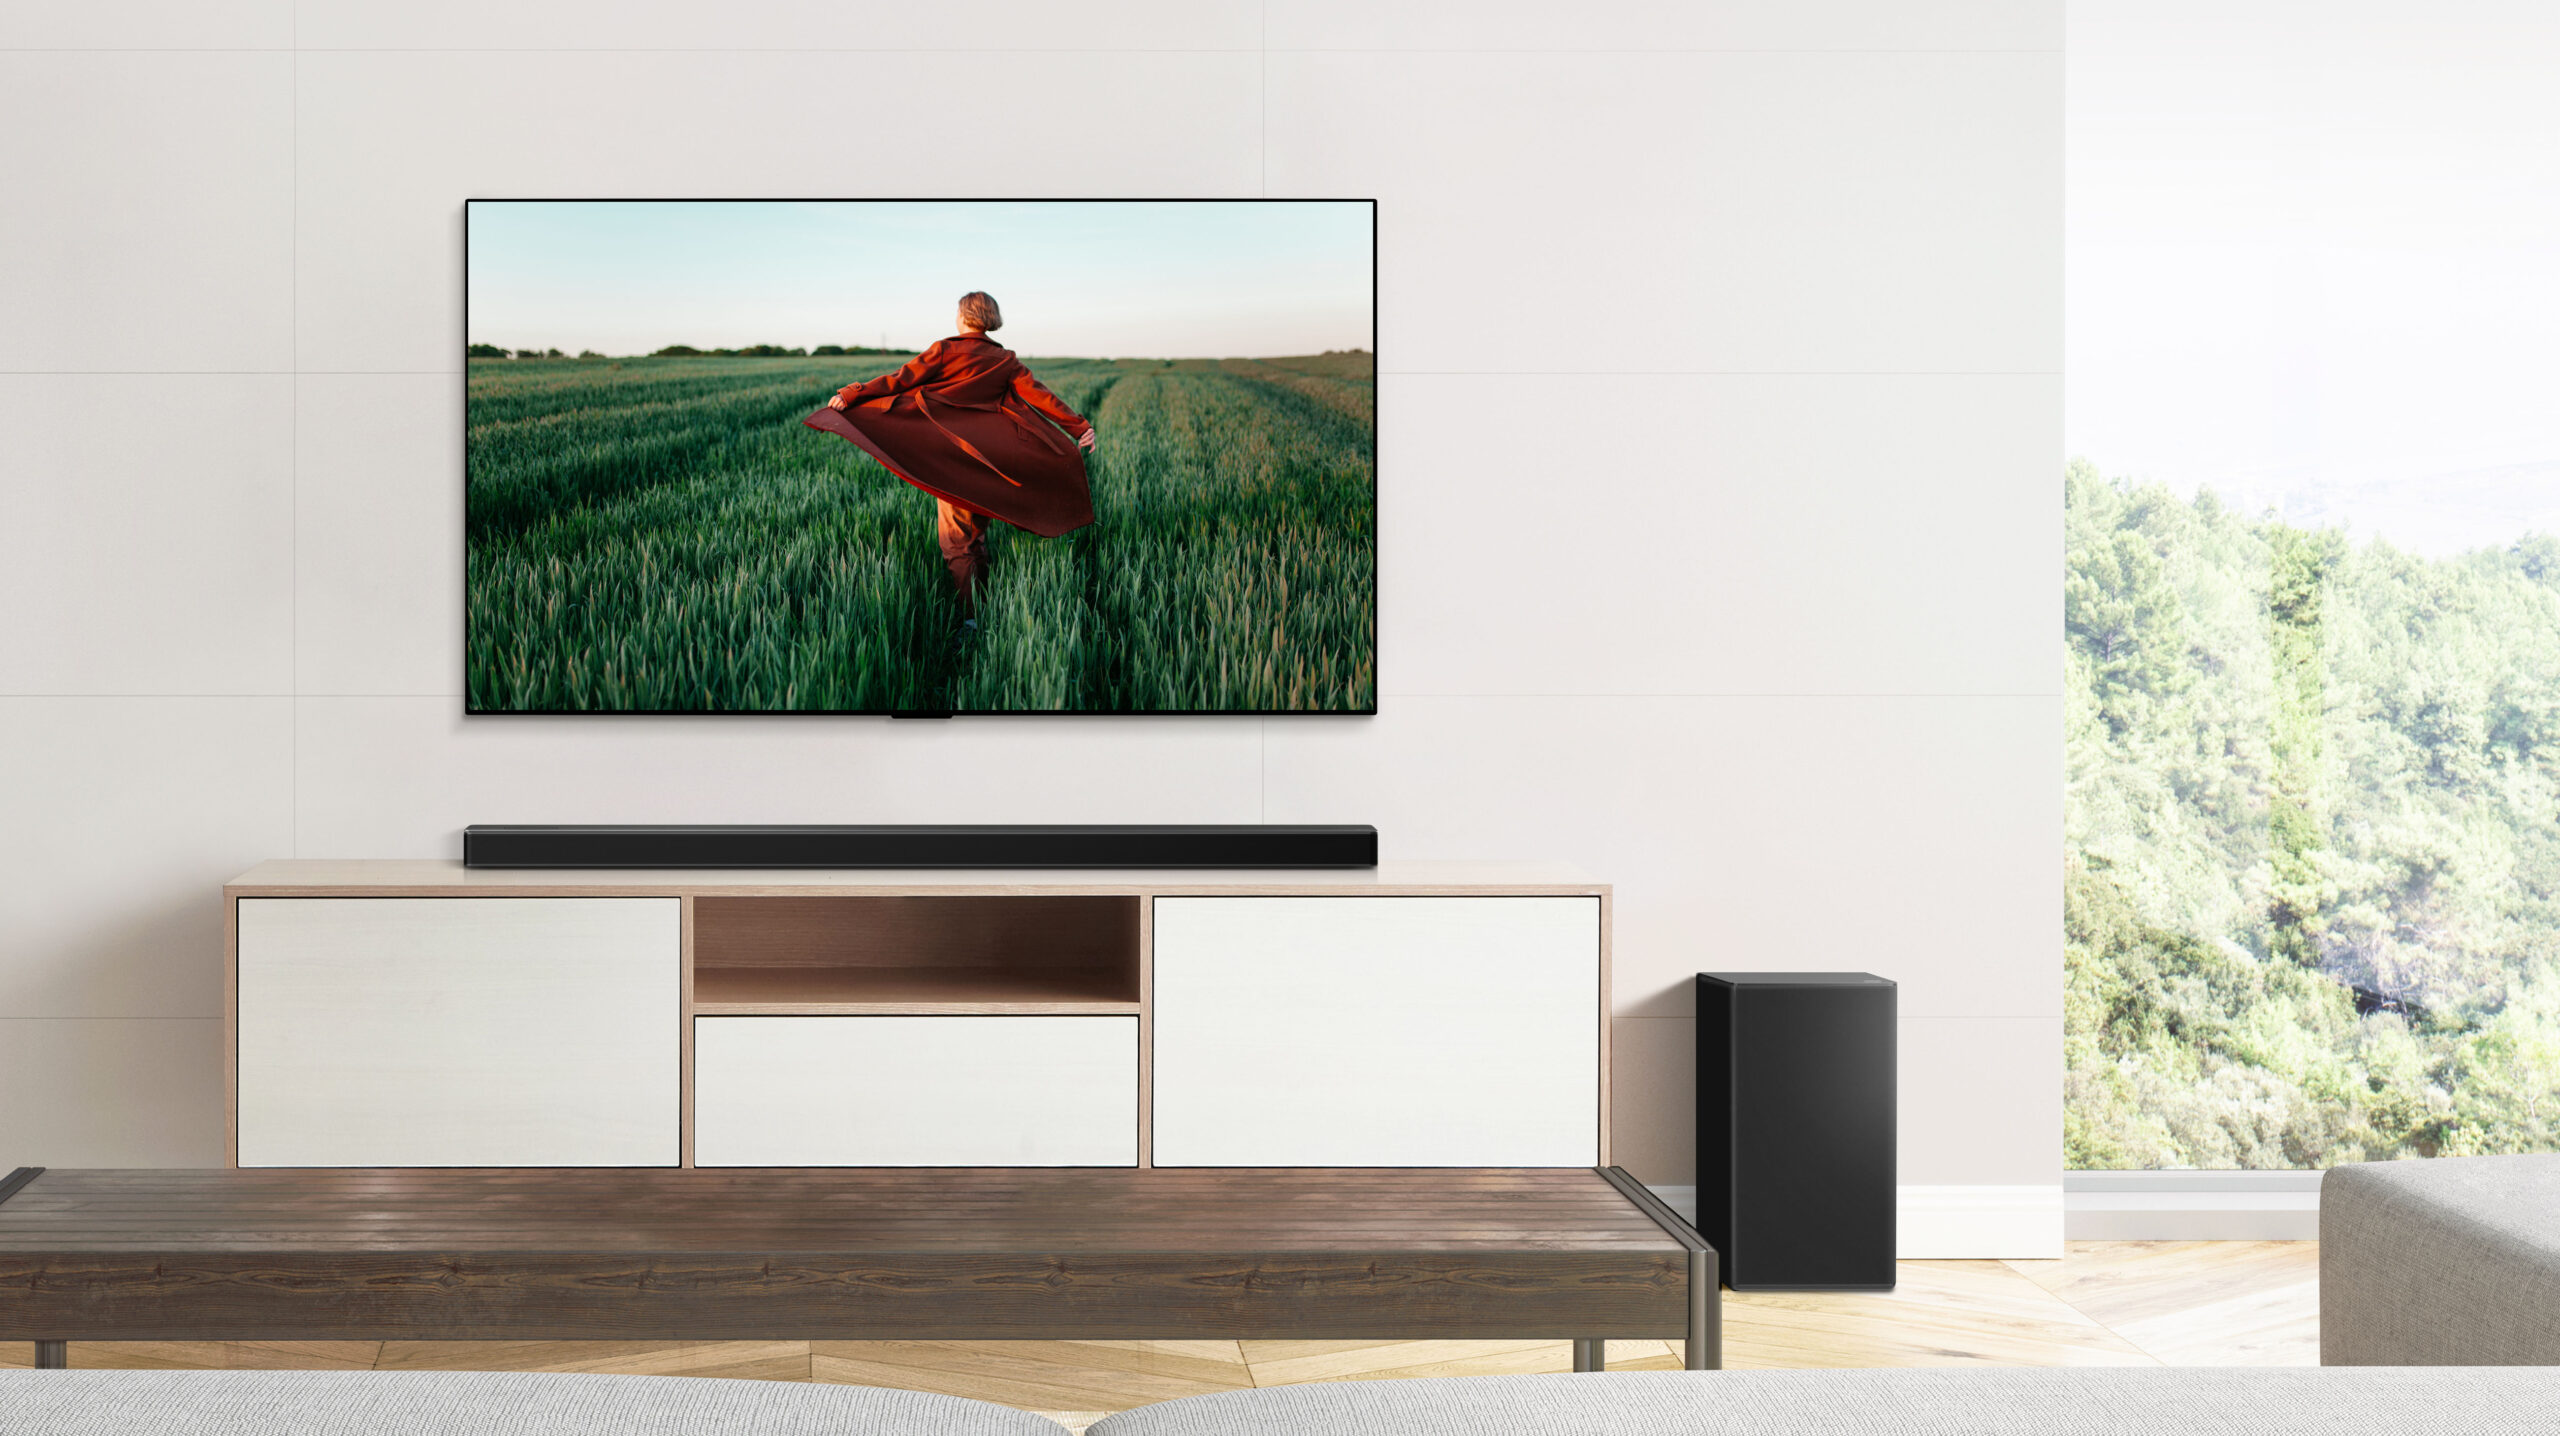 det samme Løve hånd LG's 2021 Soundbars Offer Premium Audio and AI Features With Sustainable  Designs | LG NEWSROOM